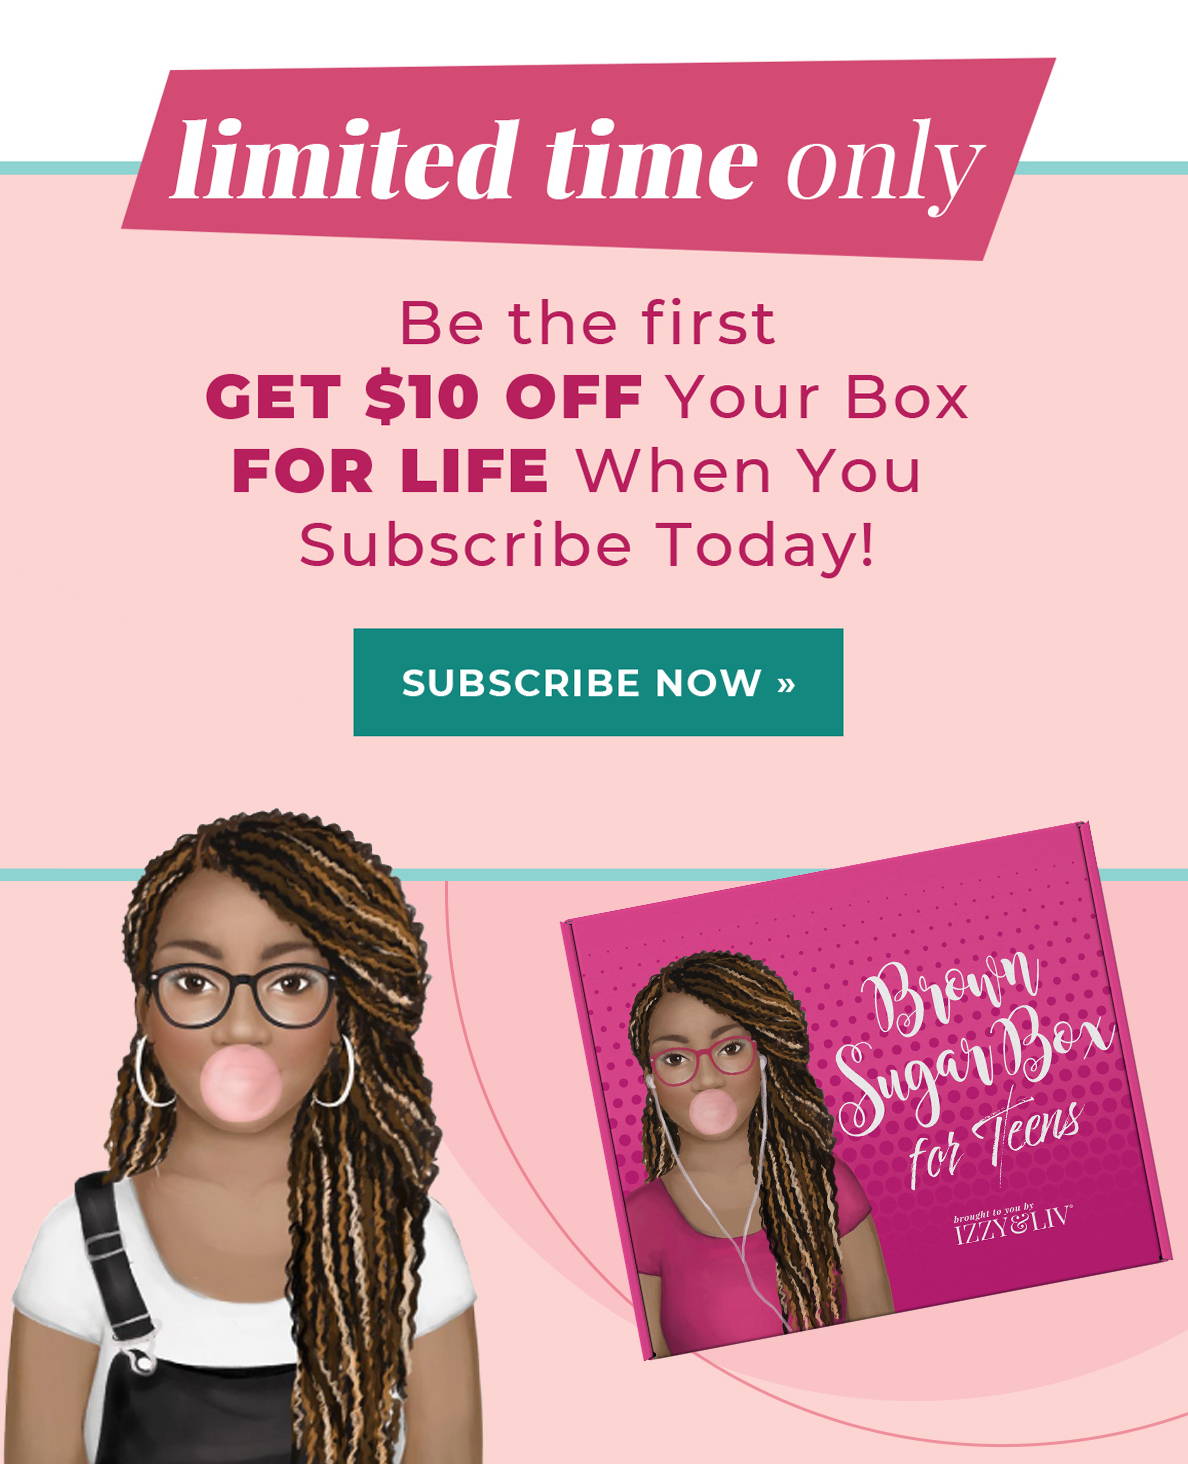 Limited Time! Get $10 Off Your Box For Life When You Subscribe Today! - Subscribe Now!